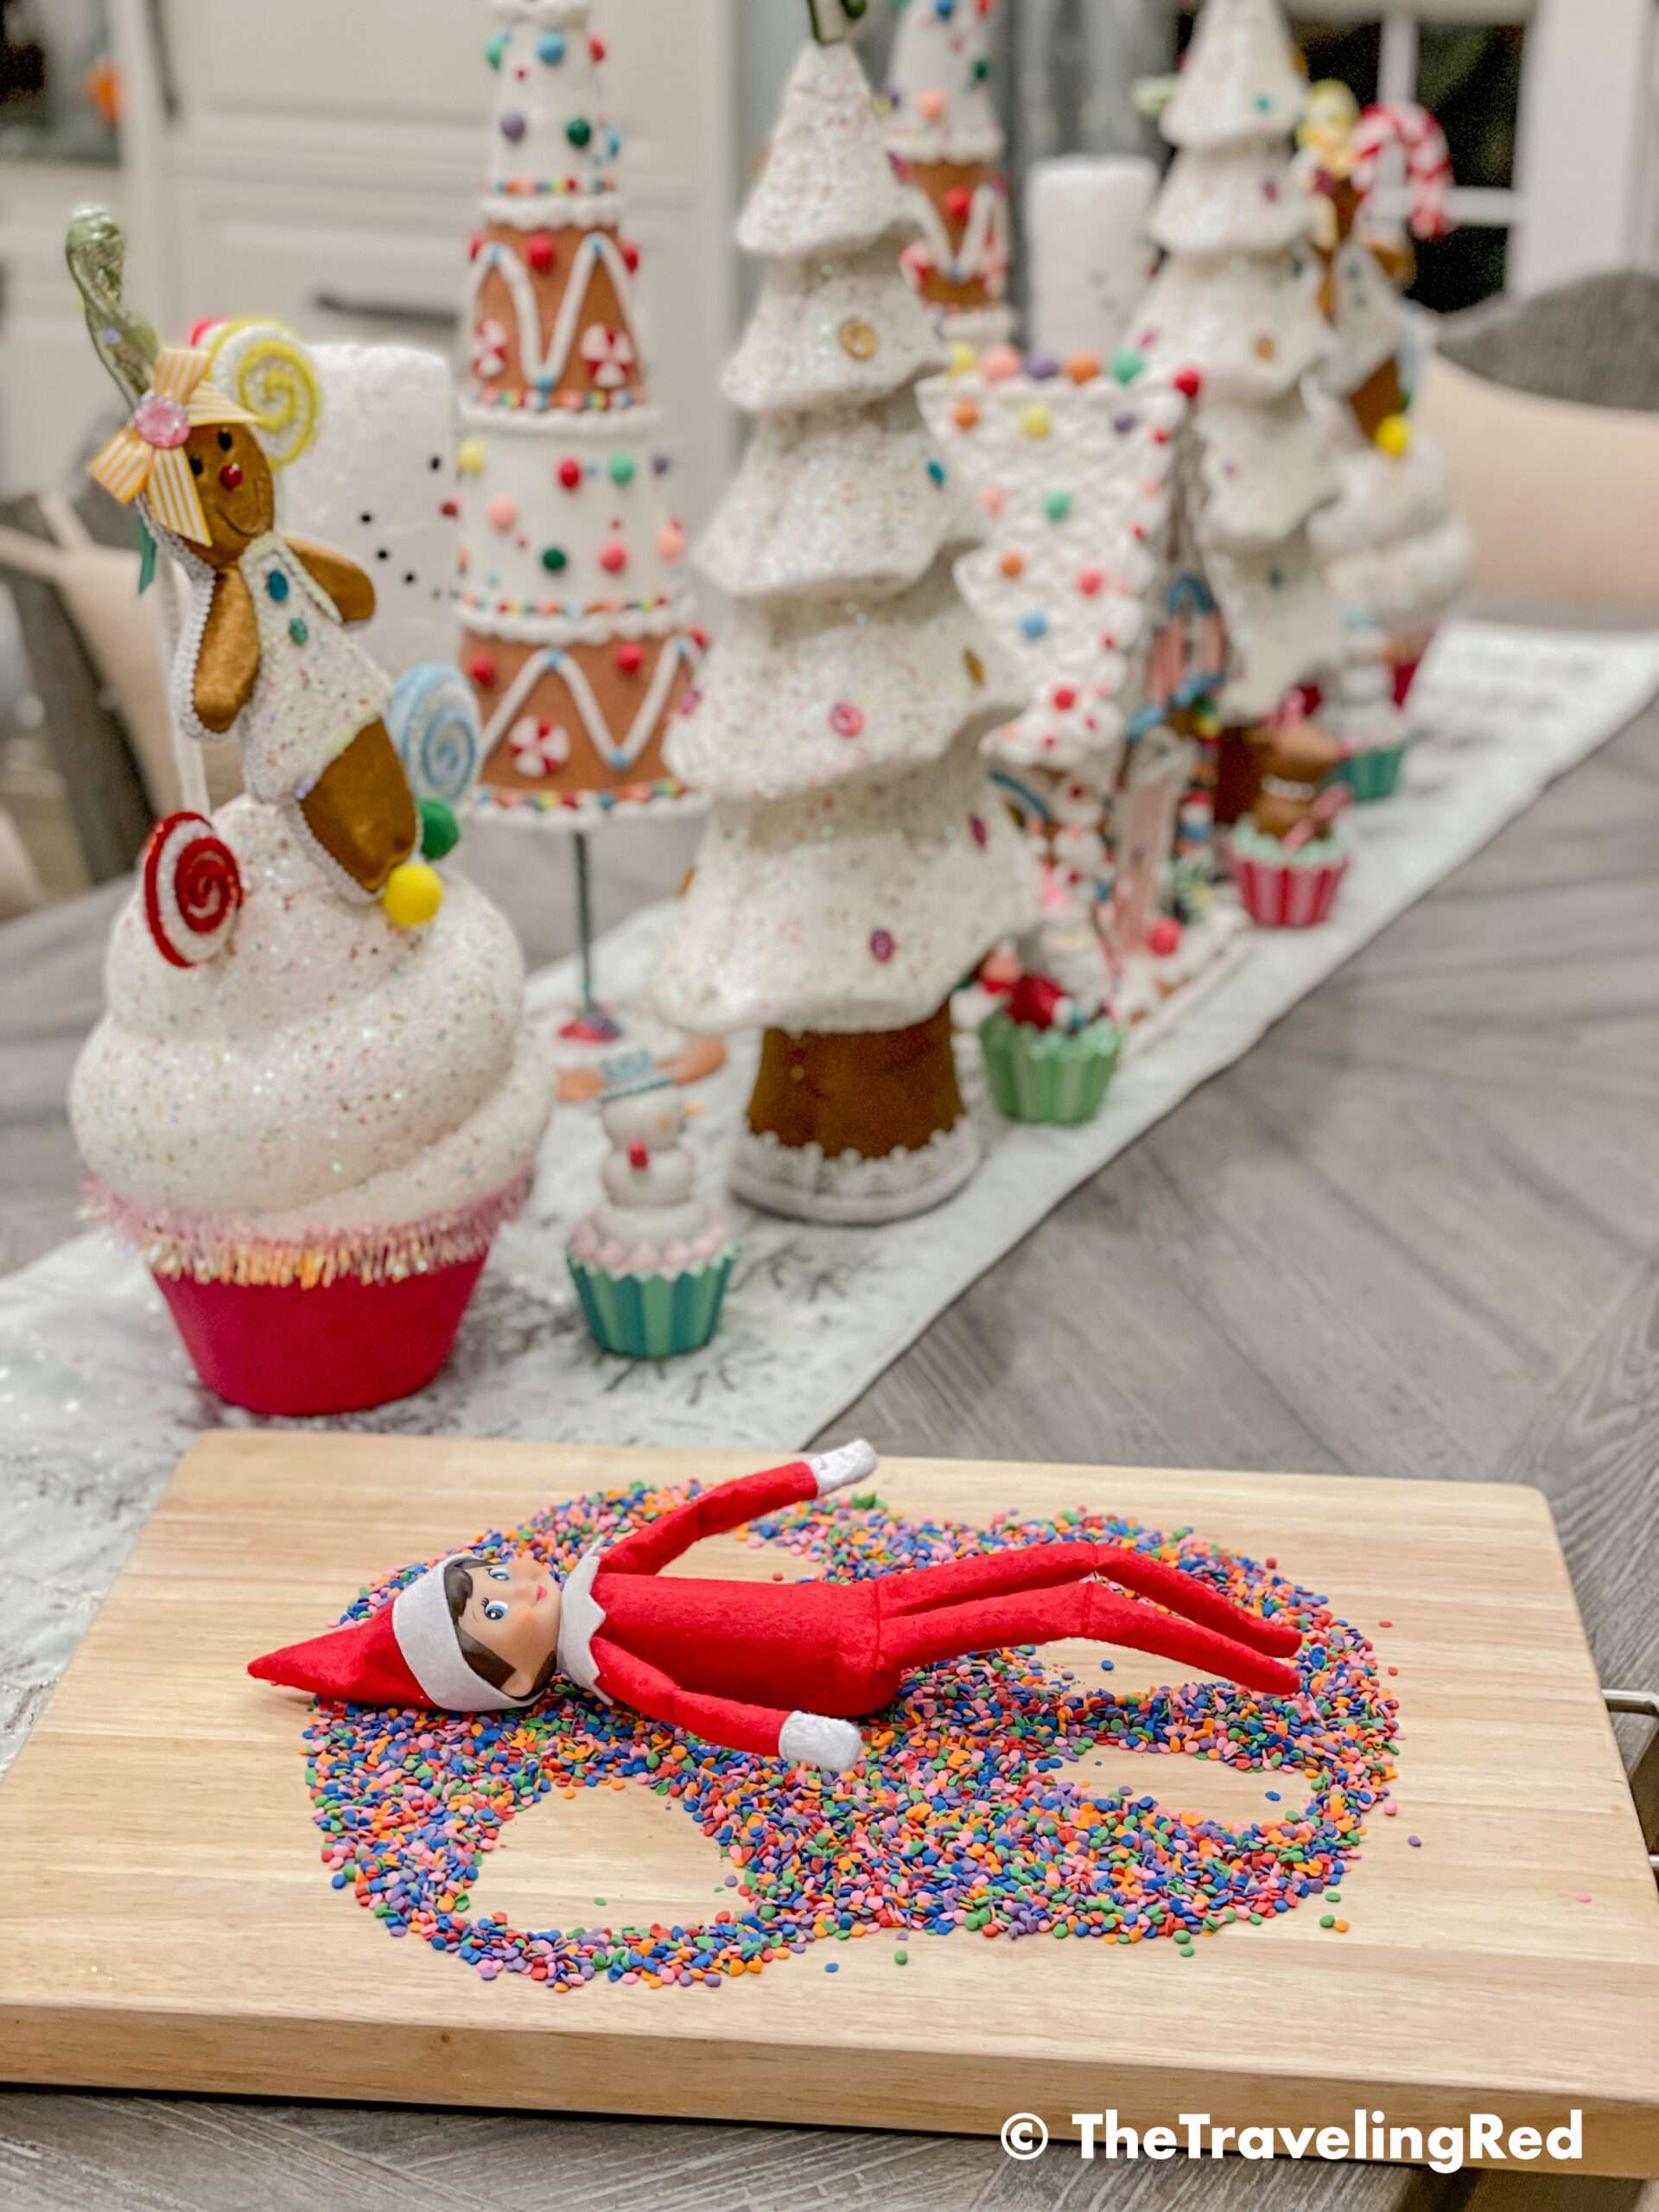 Naughty Elf on the shelf used sprinkles to make a snow angel. Fun and easy elf on the shelf ideas for a naughty elf that are quick and easy using things you have at home.